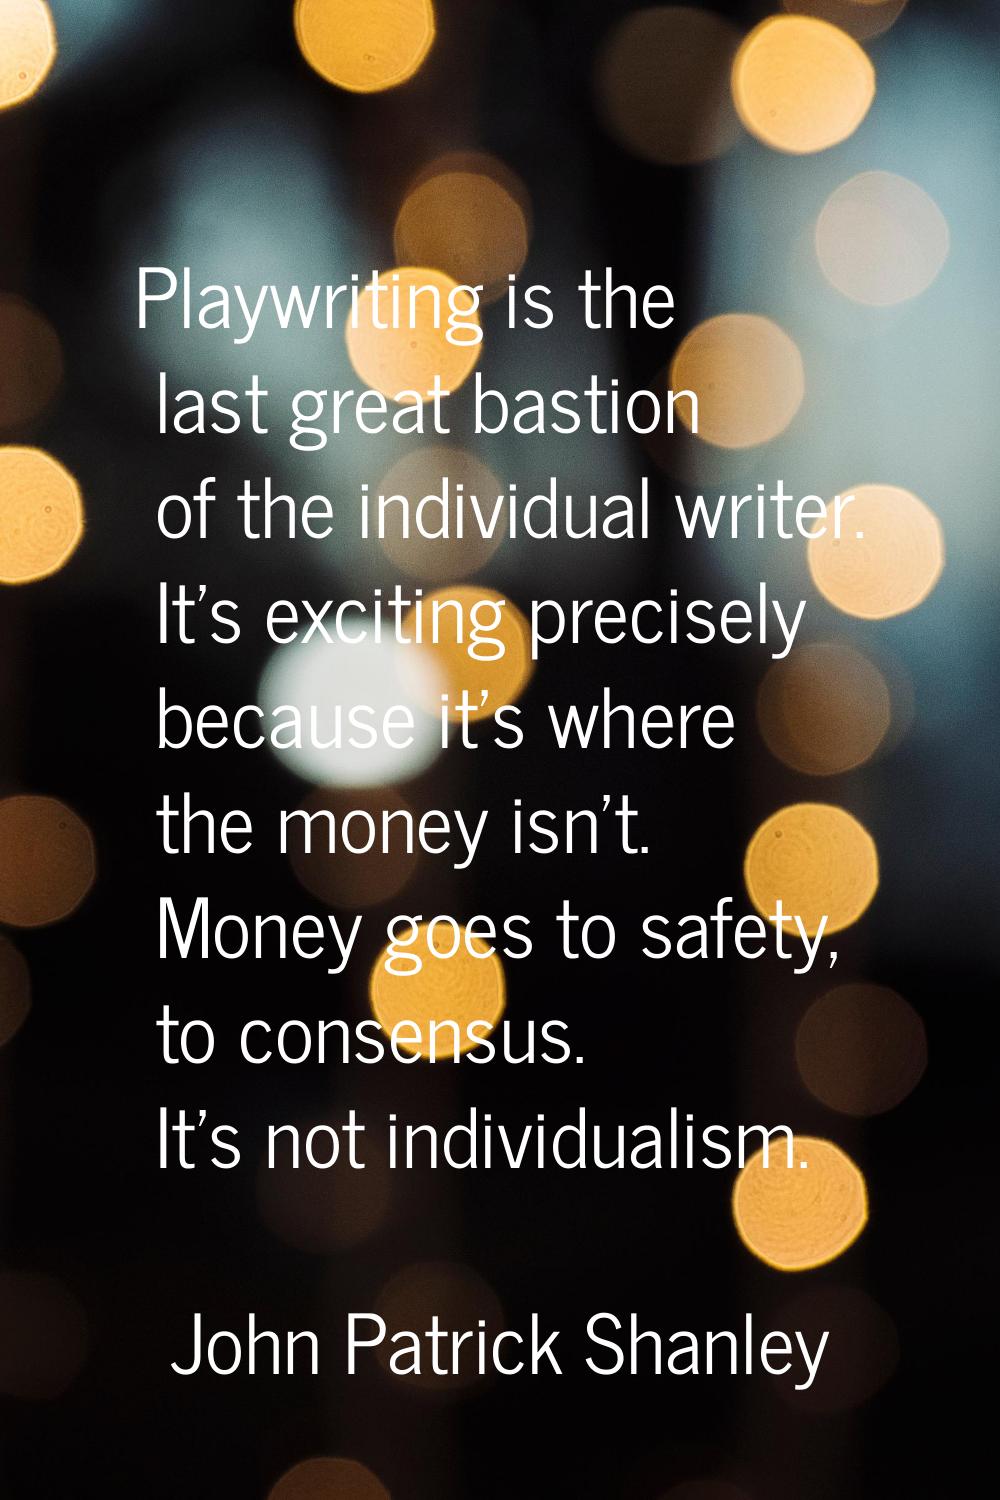 Playwriting is the last great bastion of the individual writer. It's exciting precisely because it'